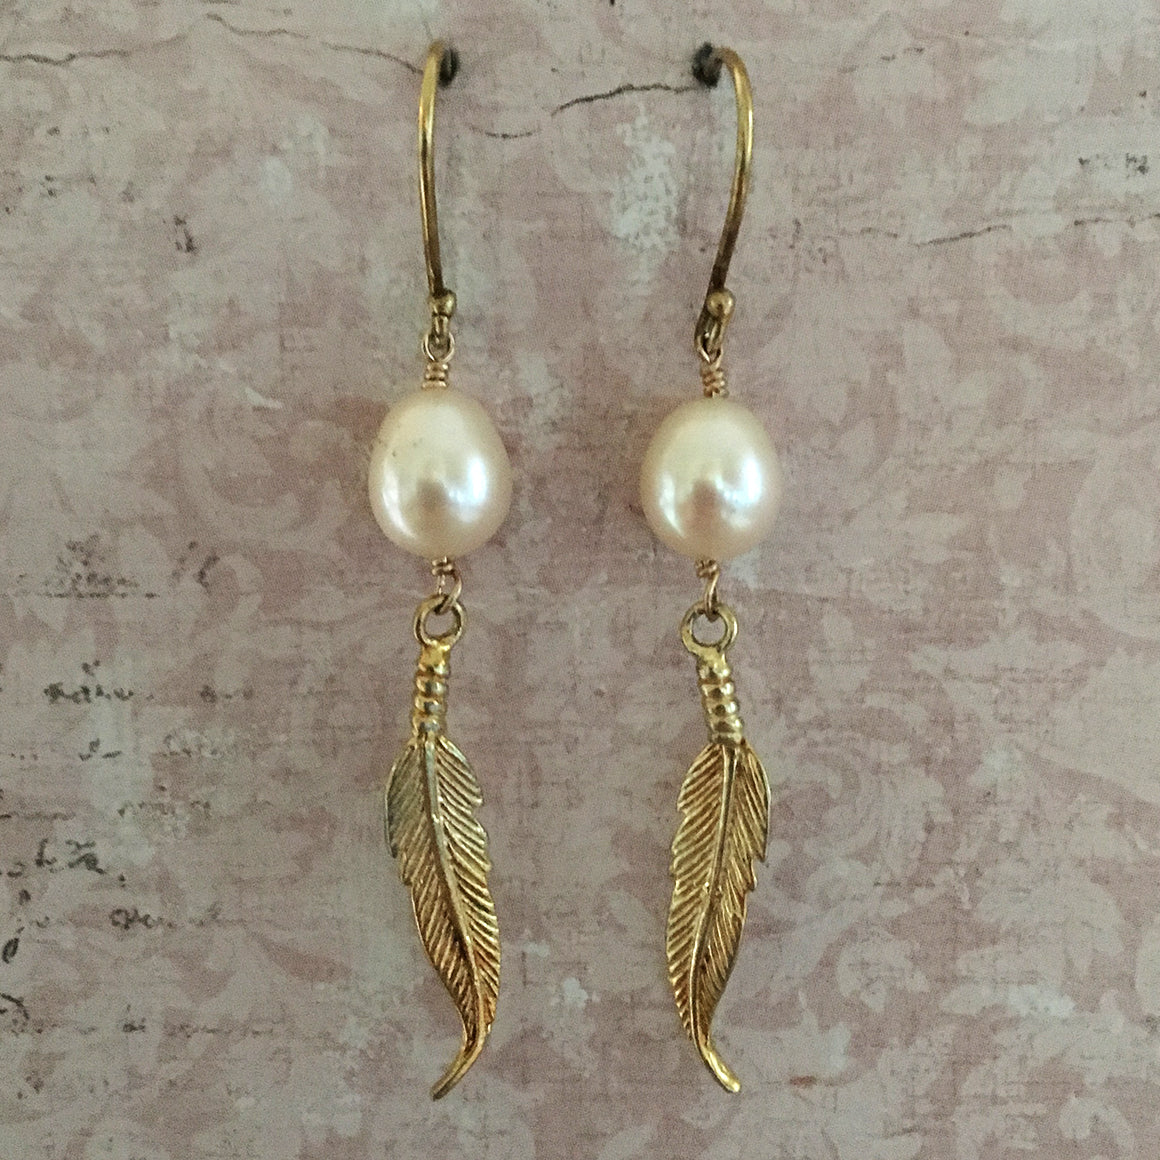 Pearl and Feather Earrings